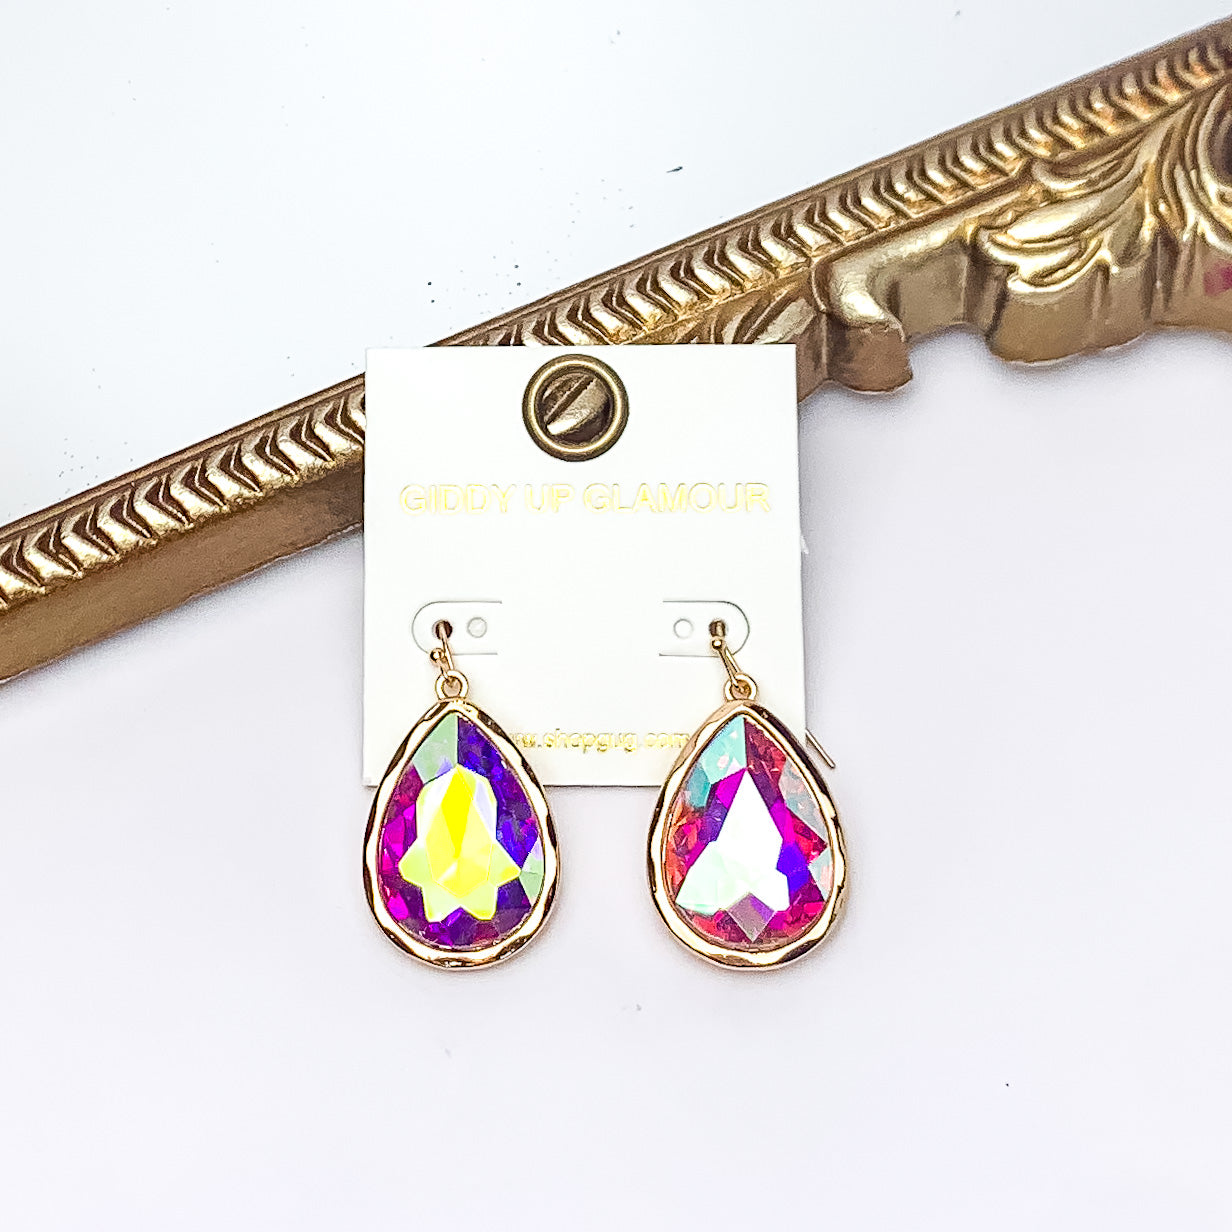 Gold Tone Large Teardrop Earrings With AB Crystals. Pictured on a white background with a gold frame behind the earrings.